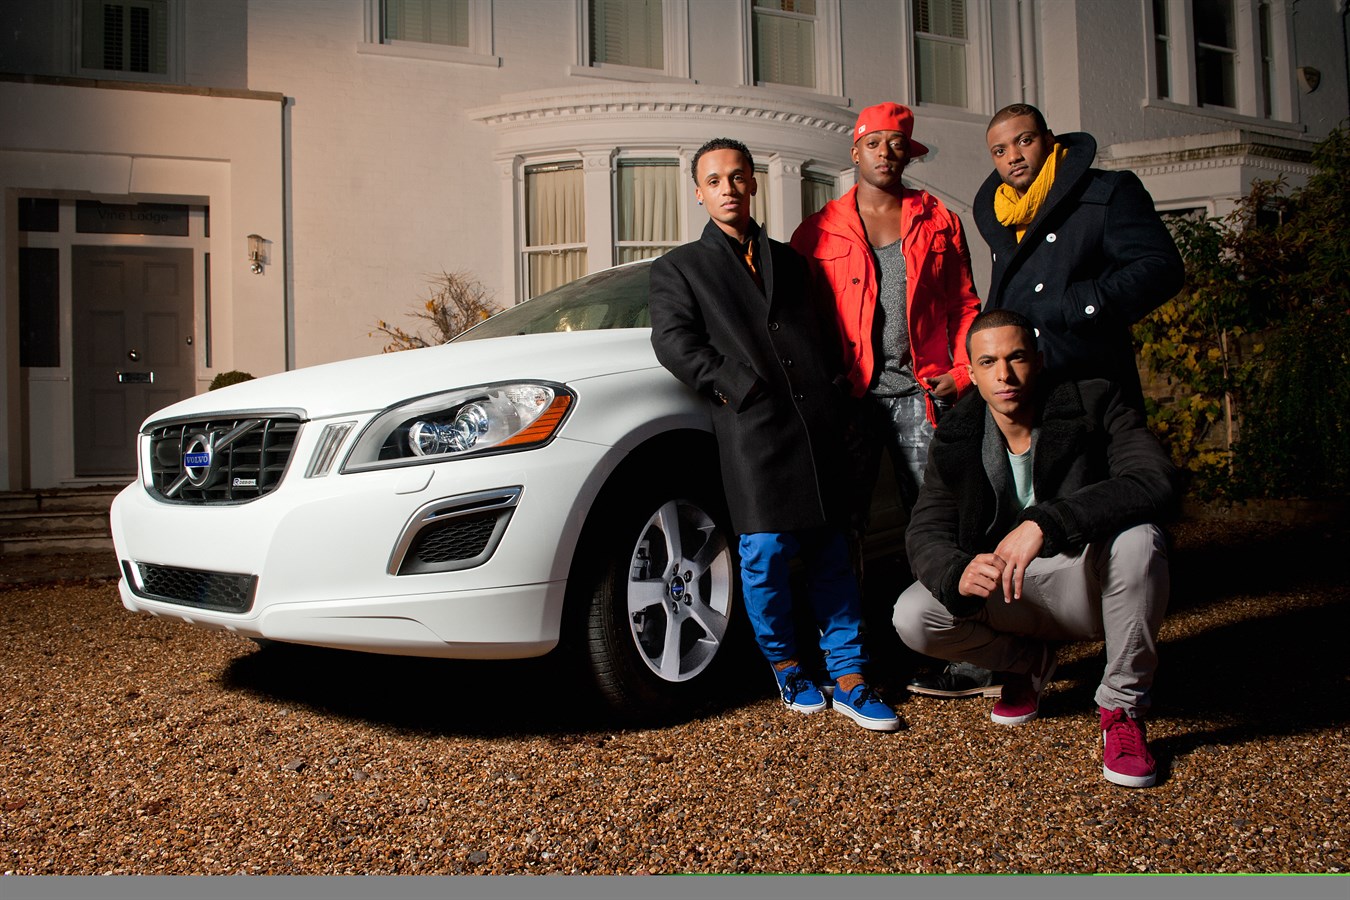 The Volvo XC60 and JLS